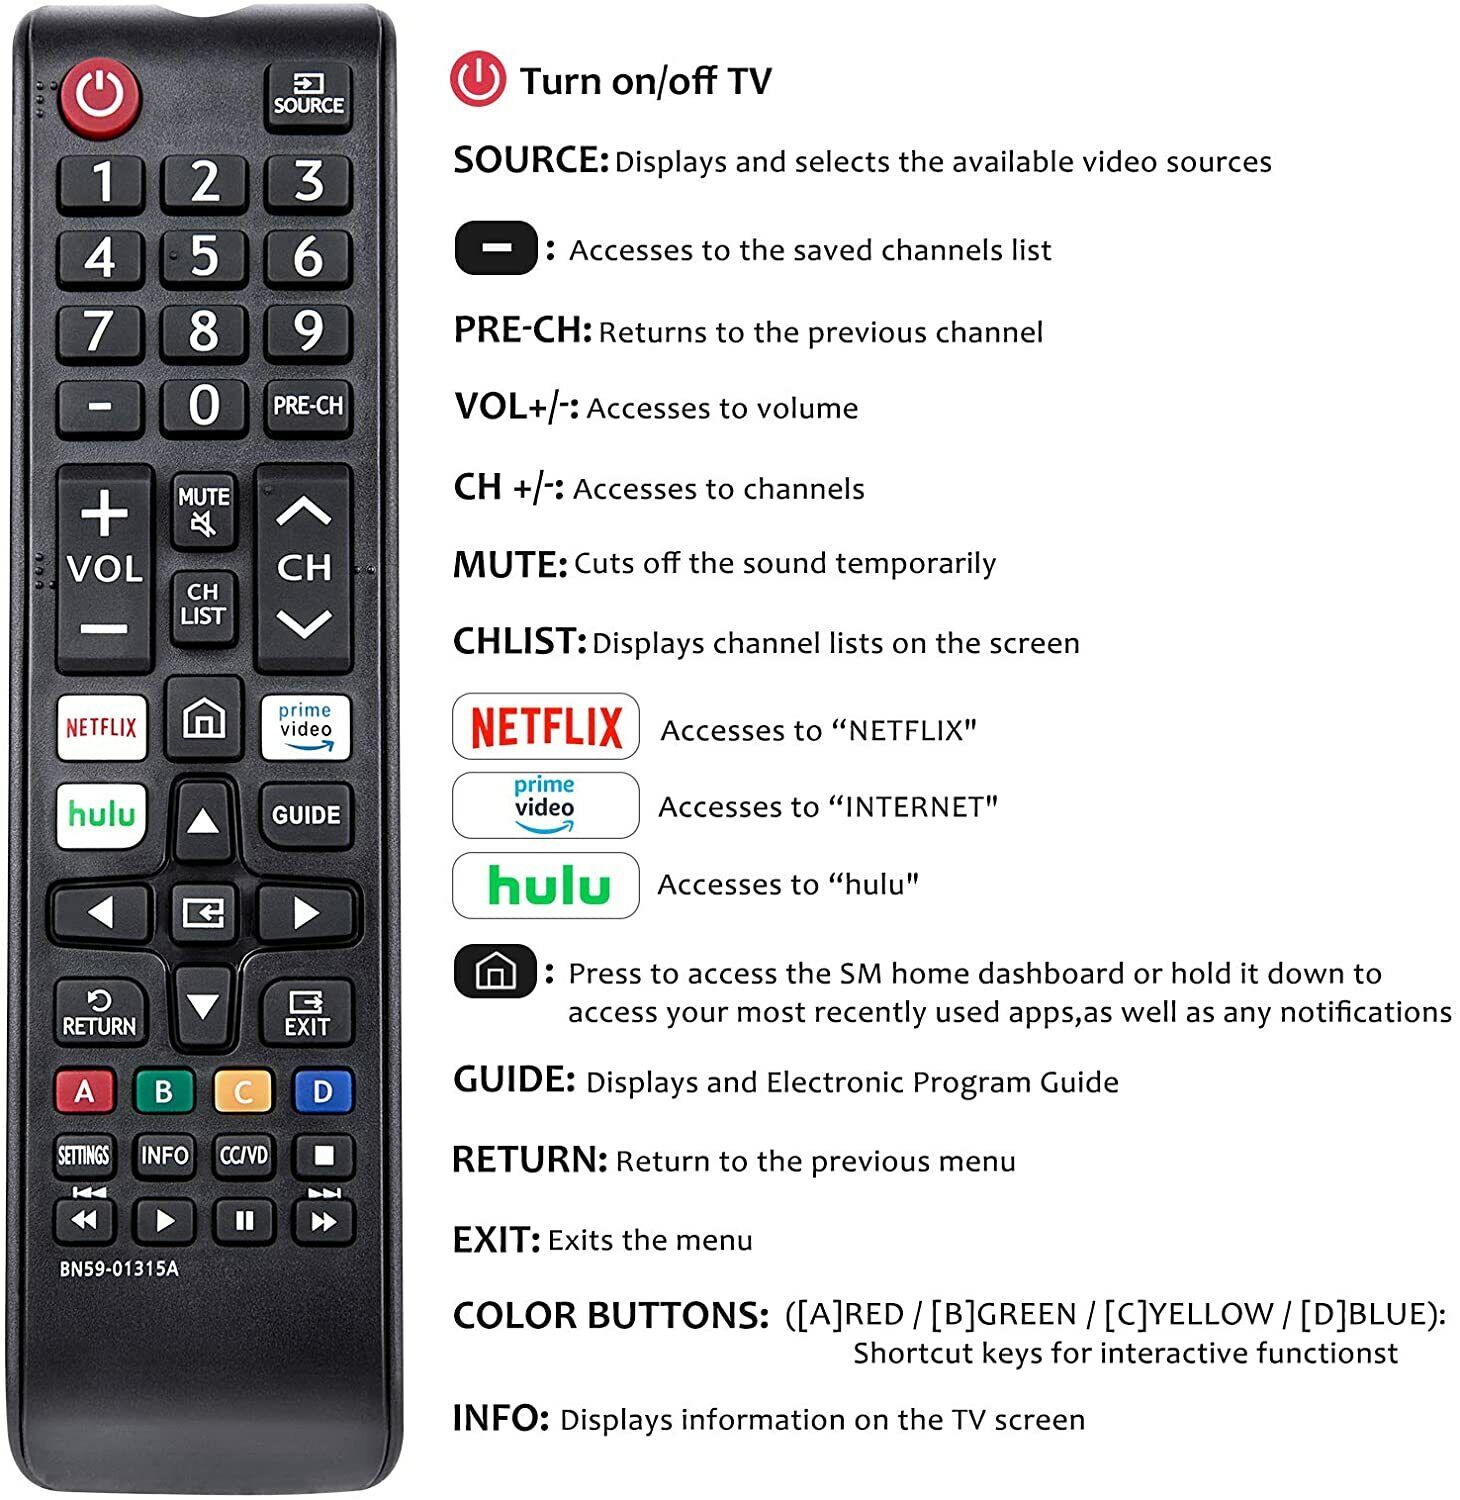 NEW BN59-01315A Replacement TV Remote for Samsung LED 4K ULTRA HDTV Smart TV